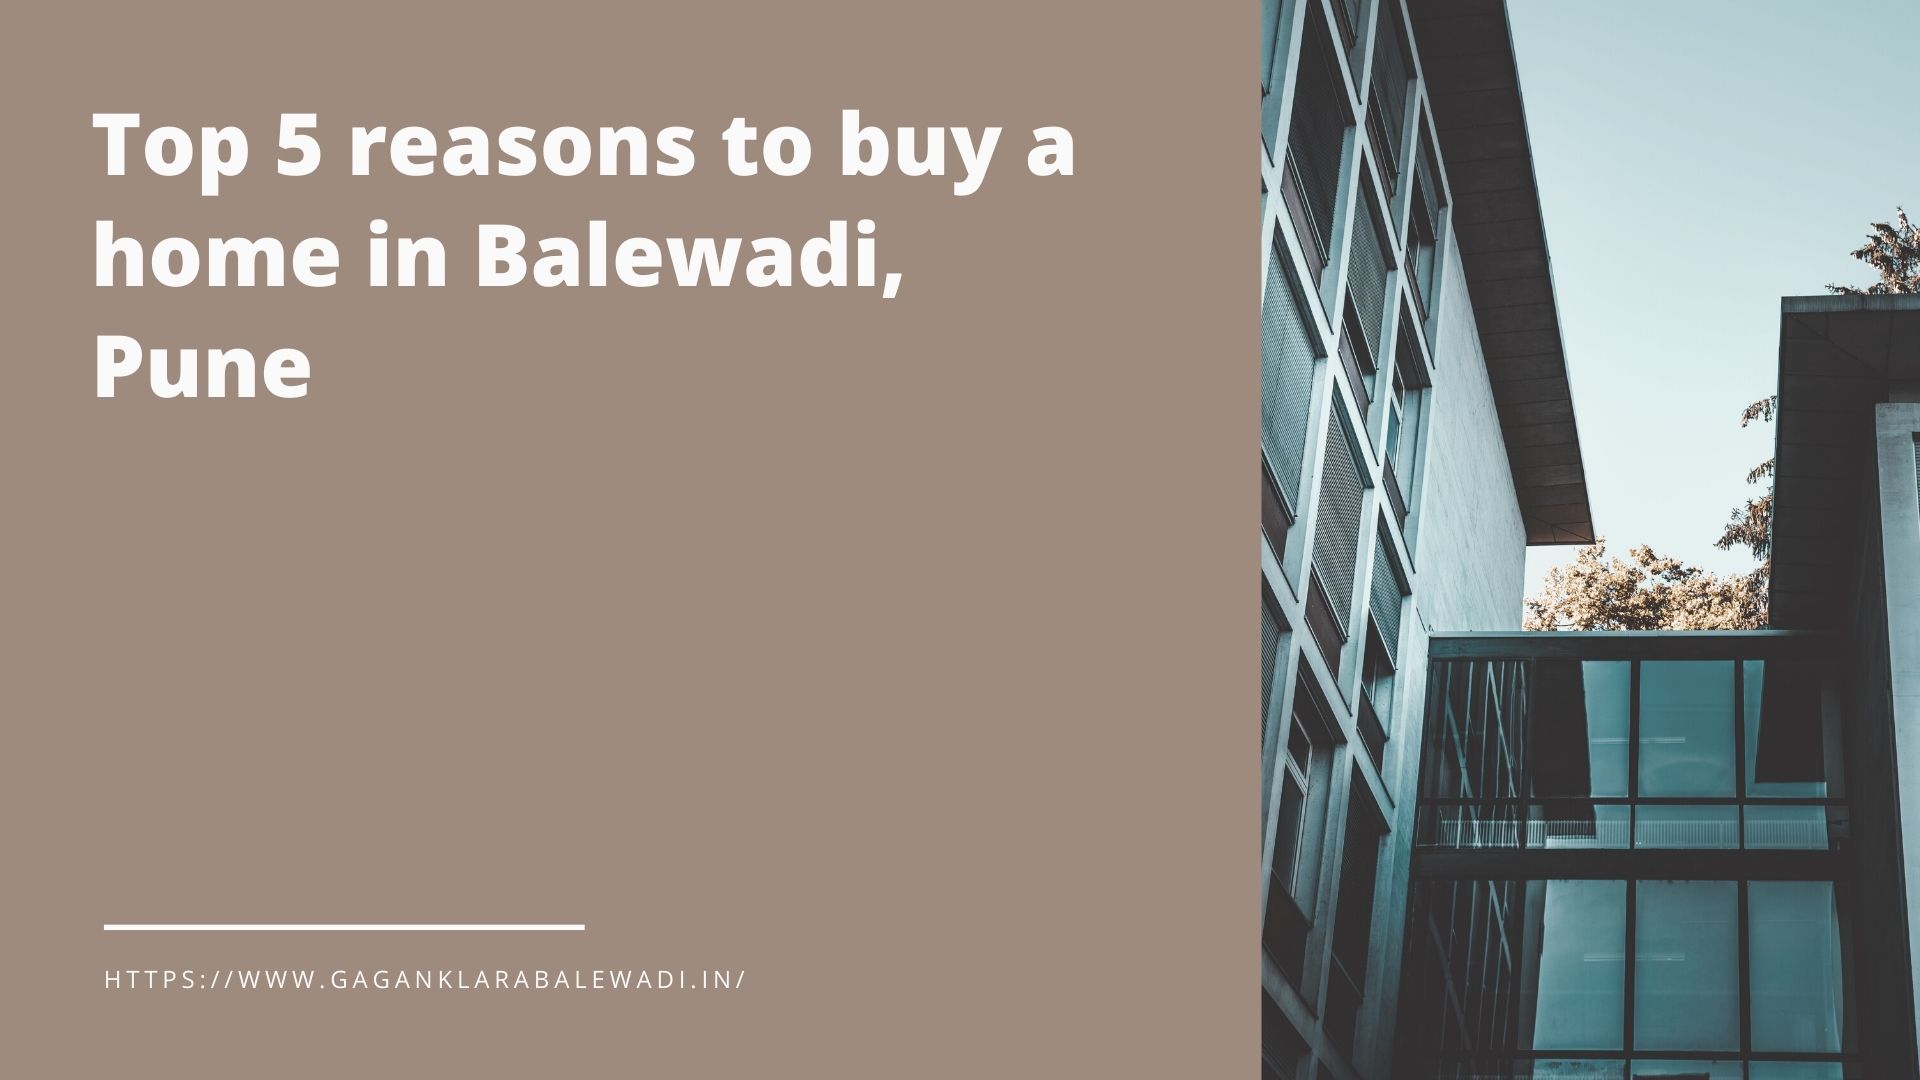 Top 5 reasons to buy a home in Balewadi, Pune